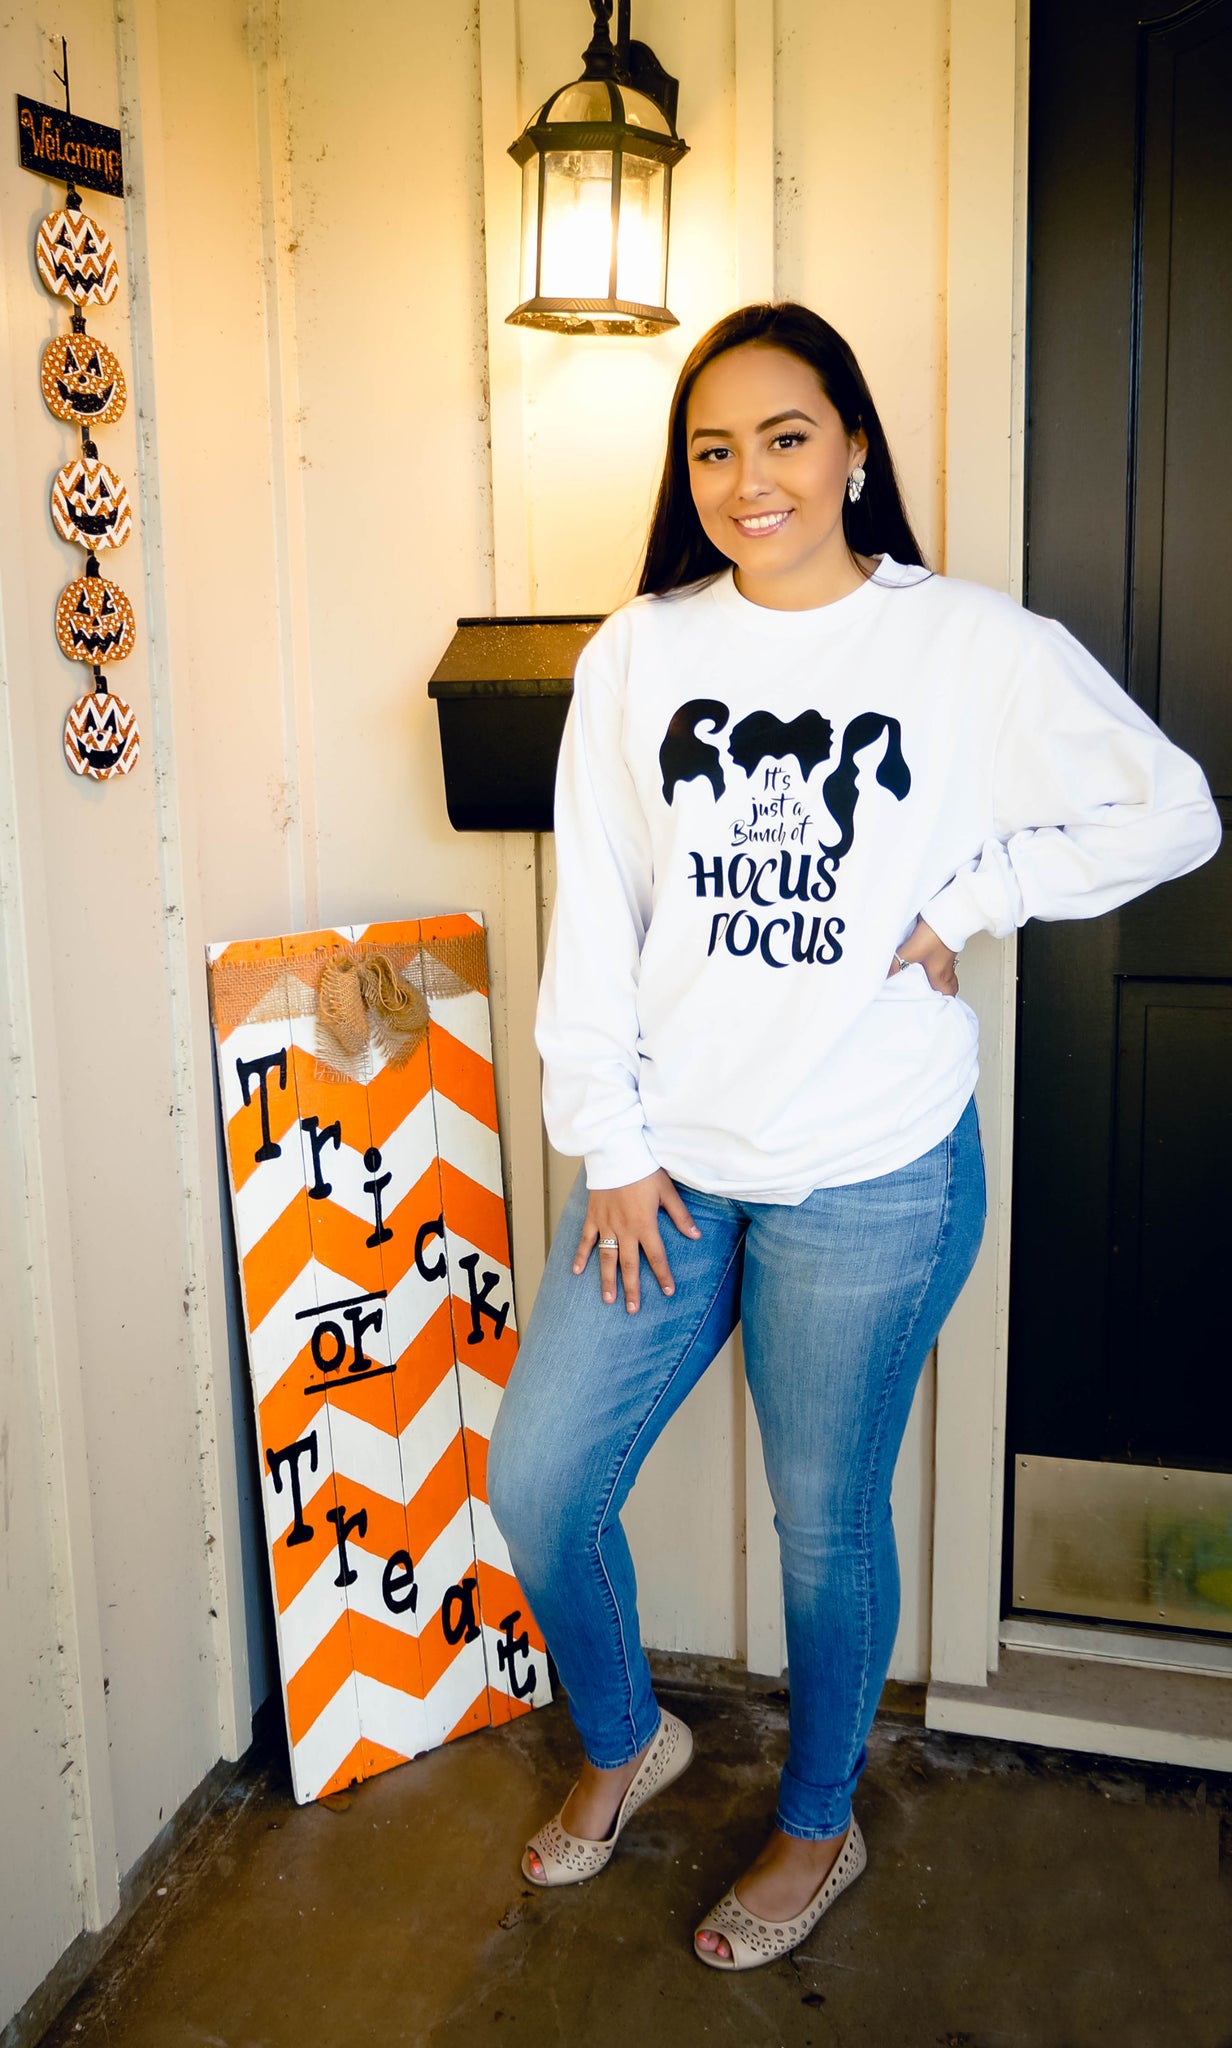 It's Just A Bunch Of Hocus Pocus Long Sleeve-White